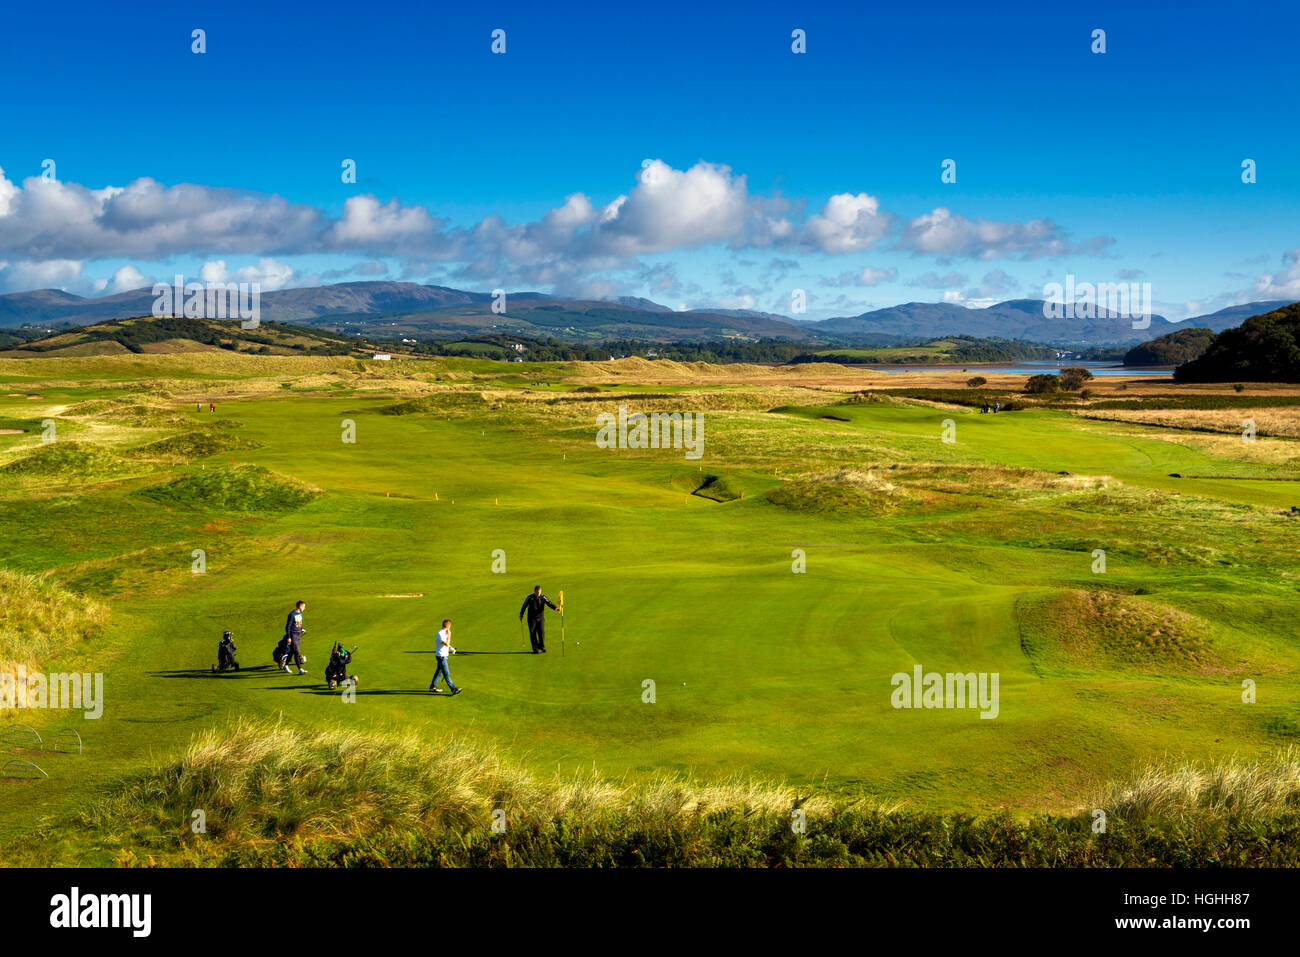 Donegal Golf Club Mervagh Blue stack mountains Co. Irlande Donegal Banque D'Images